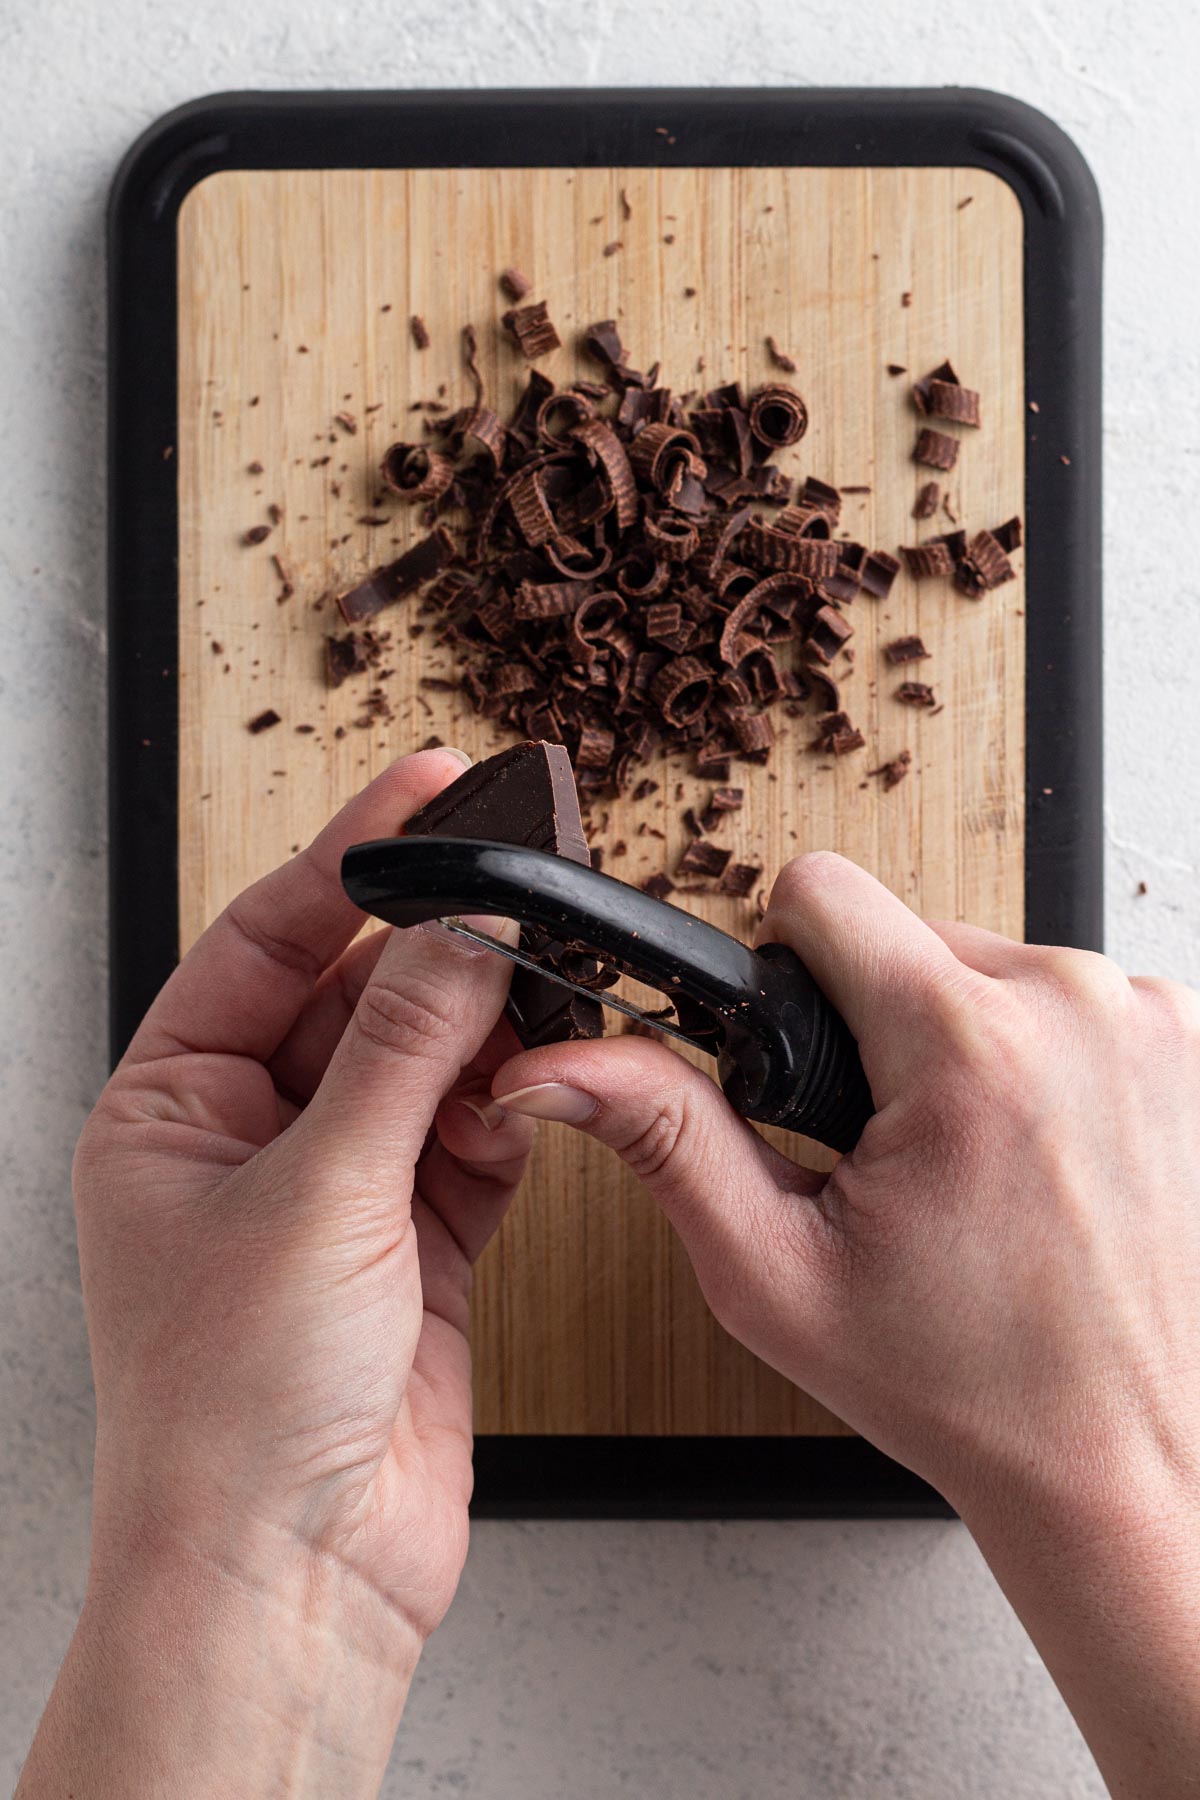 Hands holding a square of chocolate and a vegetable peeler, creating chocolate curls.